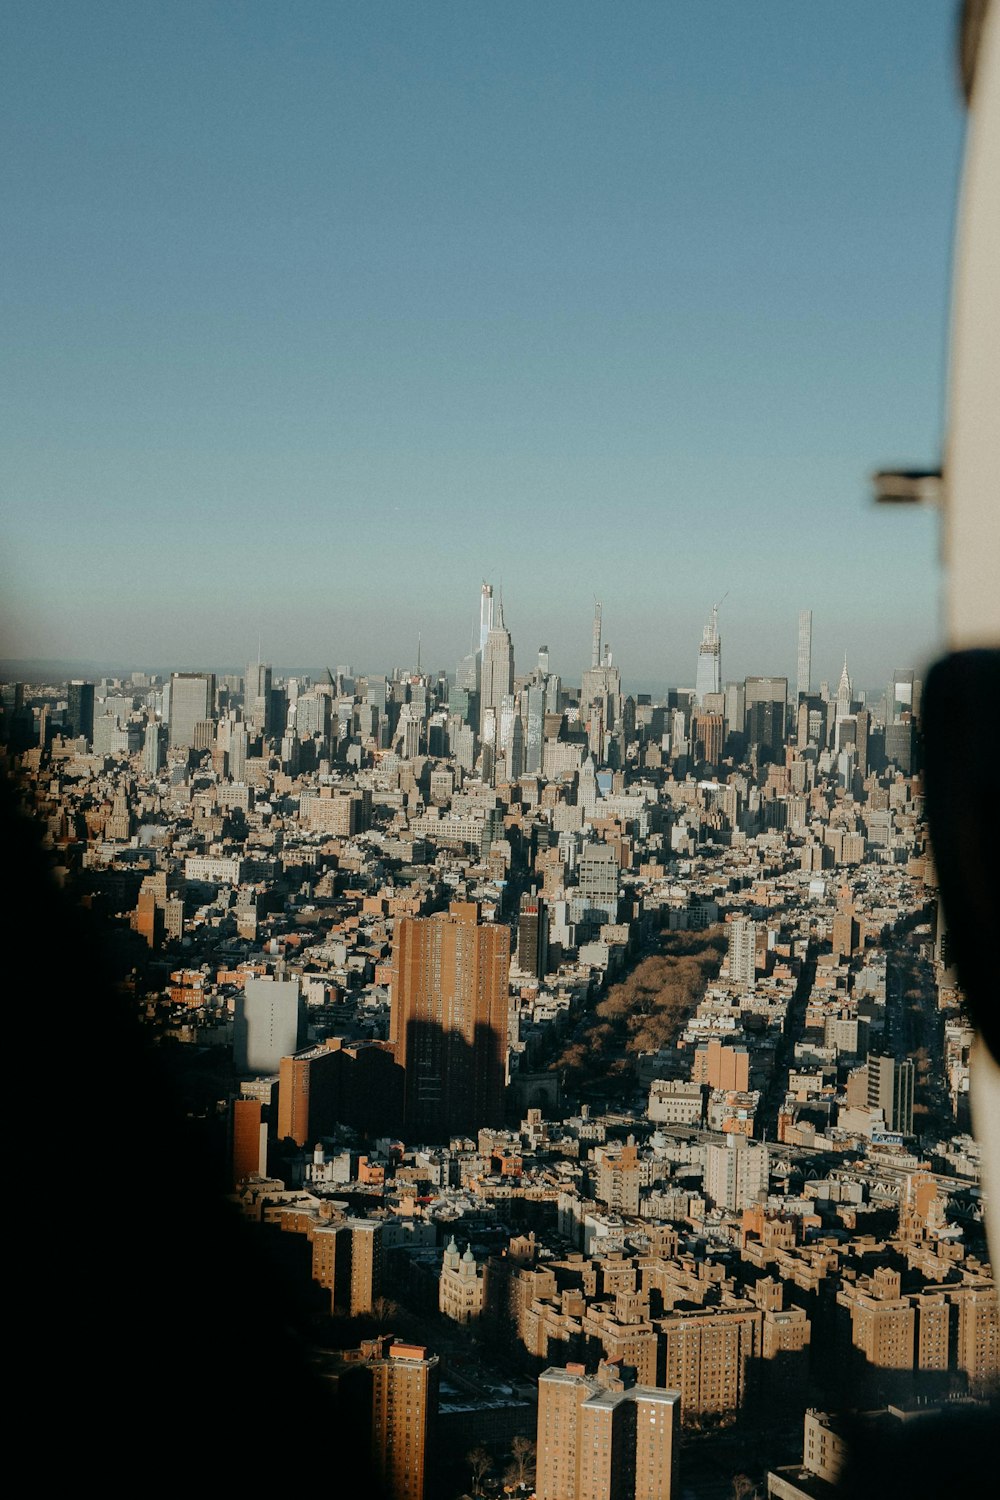 a view of a city from a plane window